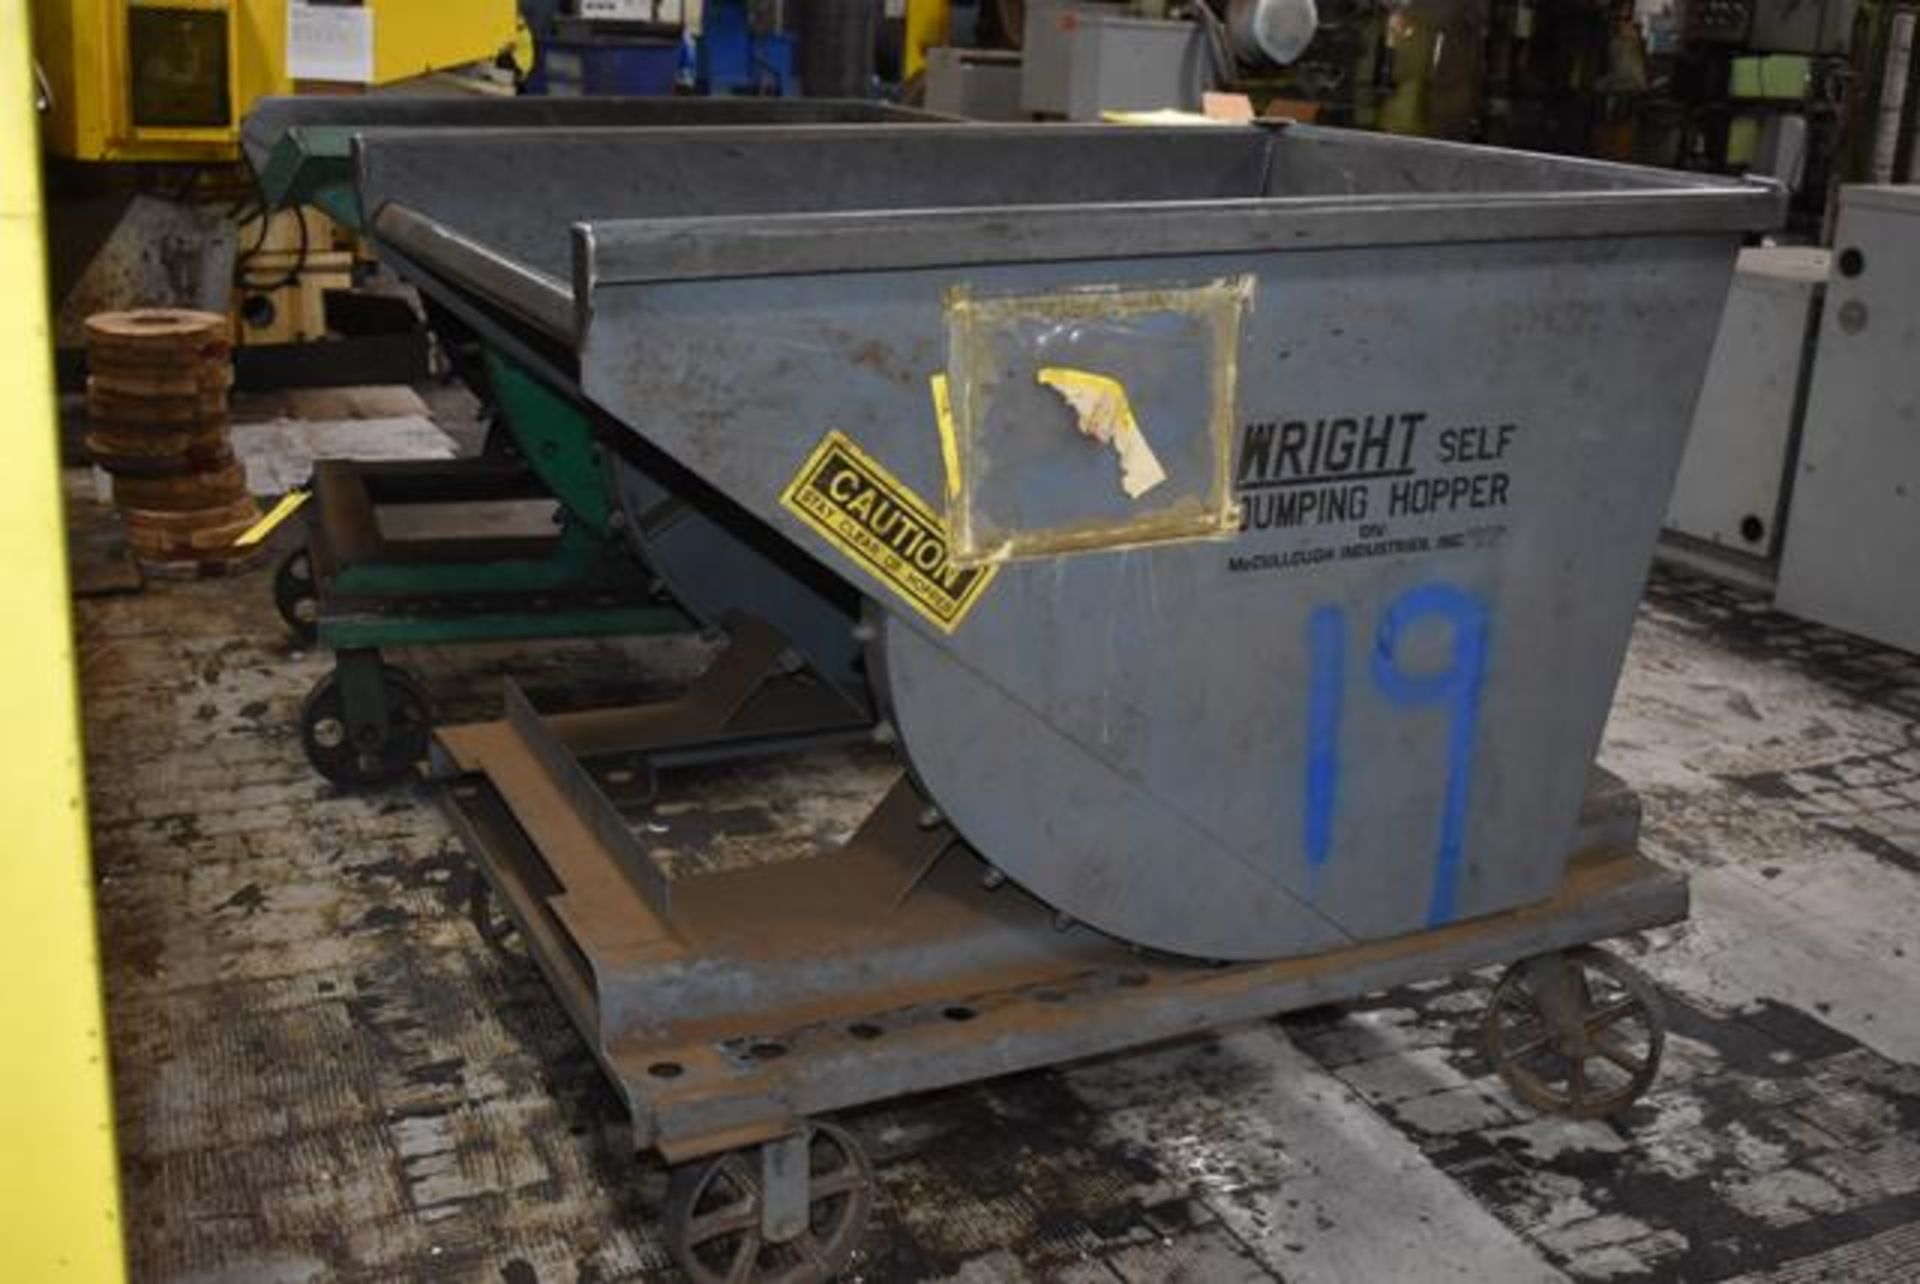 Wright Model #5077 Self Dumping Hopper, Rated 1/2 Yd Capacity - Image 2 of 3